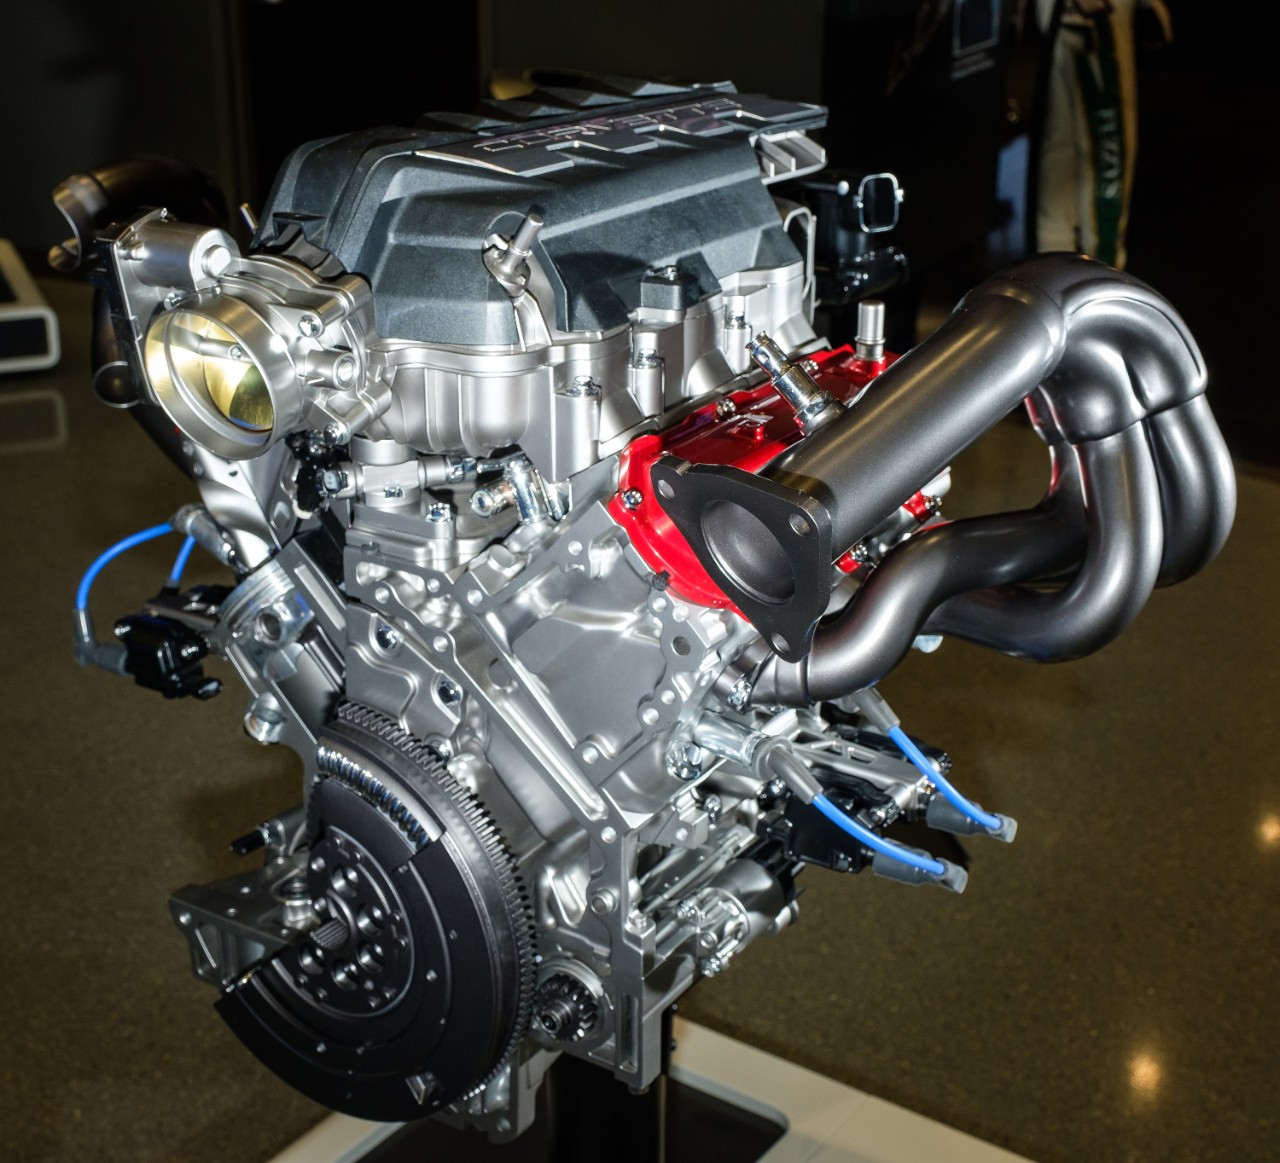 A cut-away version of the LT2 6.2L V-8 engine for the 2020 Corvette Stingray. The new mid-engine Corvette featuring the LT2 and dual-clutch transmission can reach 60 mph in 2.9 seconds and cross the quarter mile mark in 11.2 seconds at 121 mph. (Photo by Steve Fecht for Chevrolet)